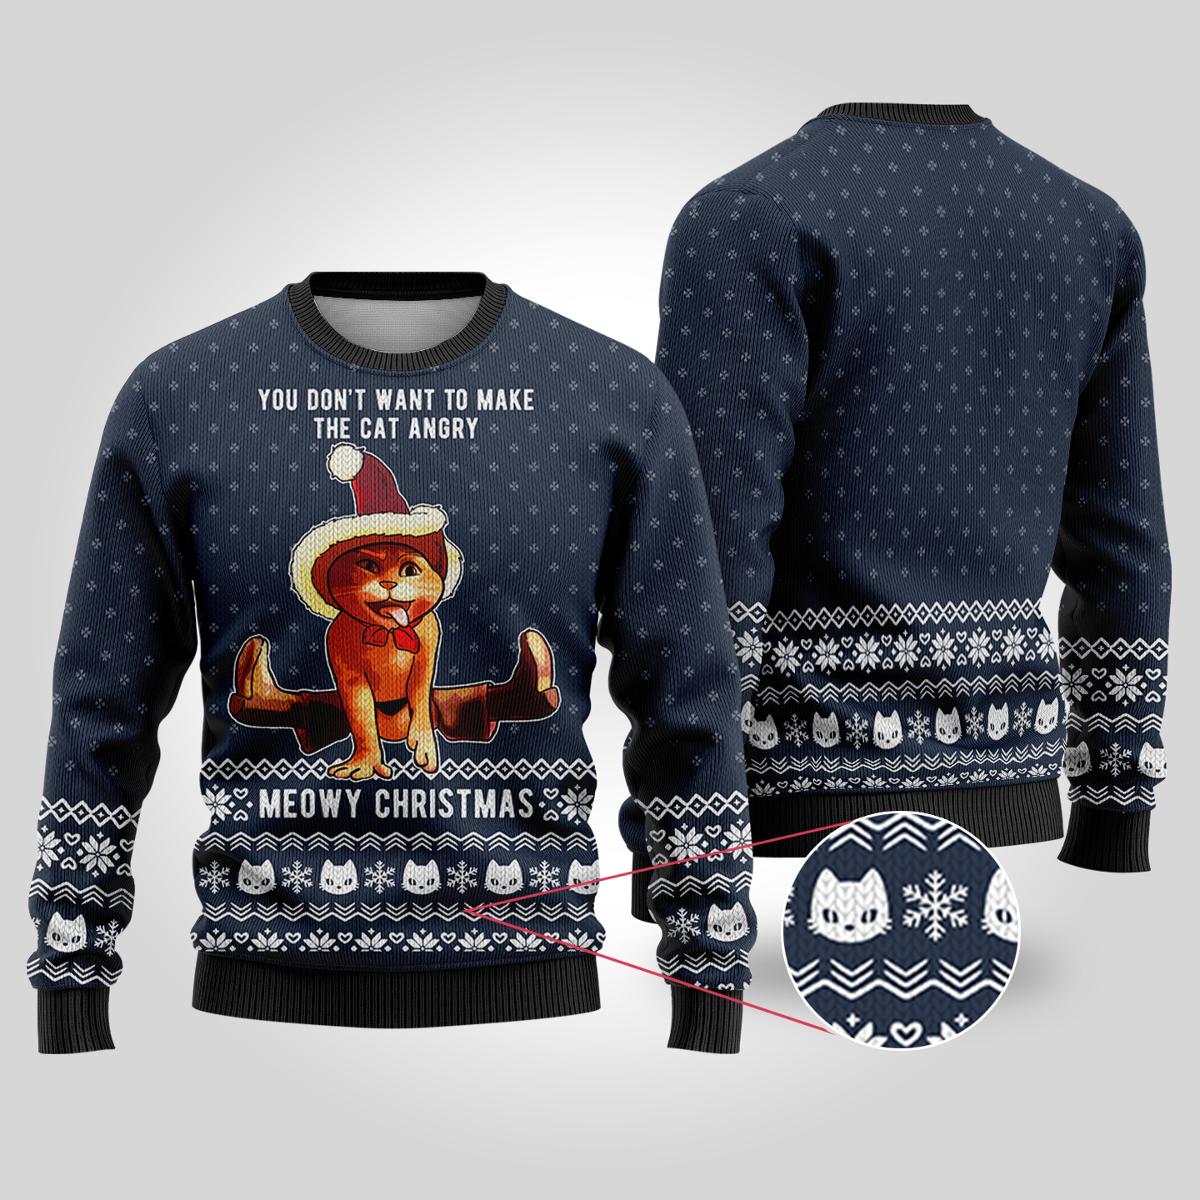 Look At It Clark National Lampoon Christmas Sweater